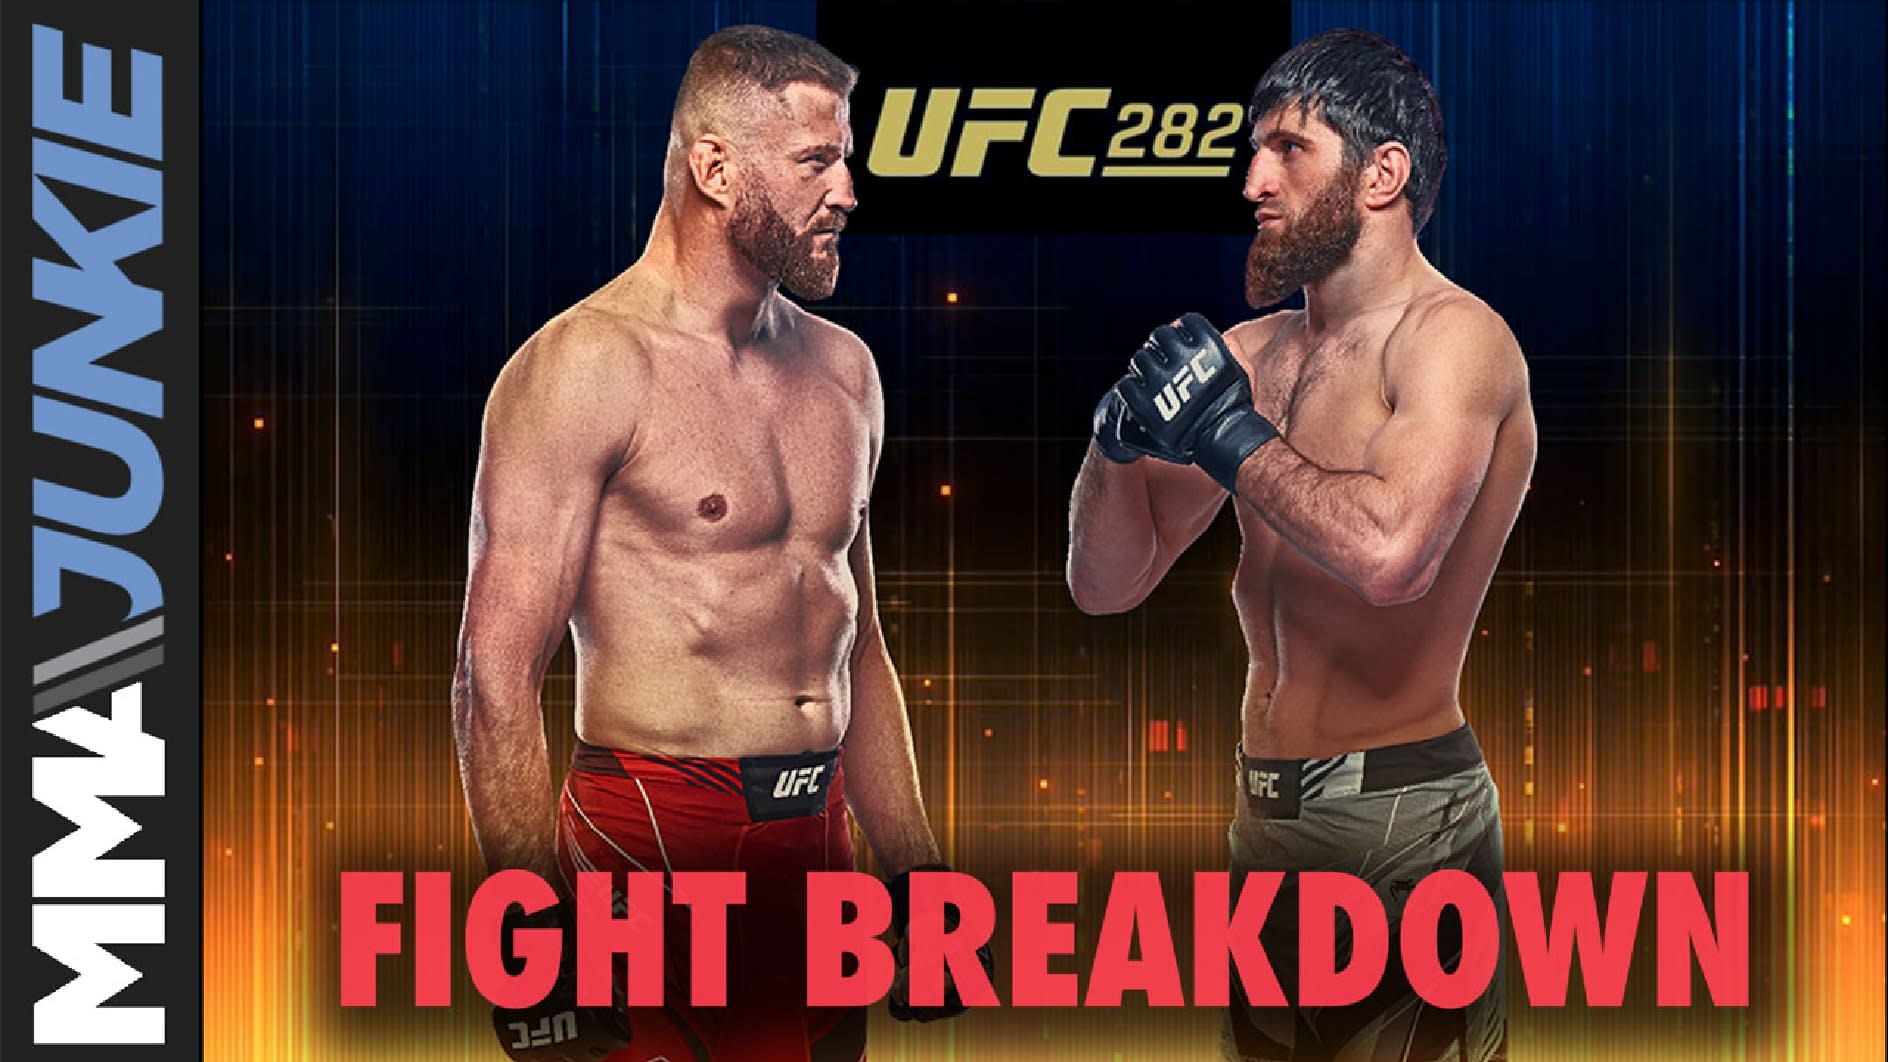 UFC 282 breakdown Will Magomed Anklalevs grappling or Jan Blachowiczs striking win the vacant light heavyweight title?